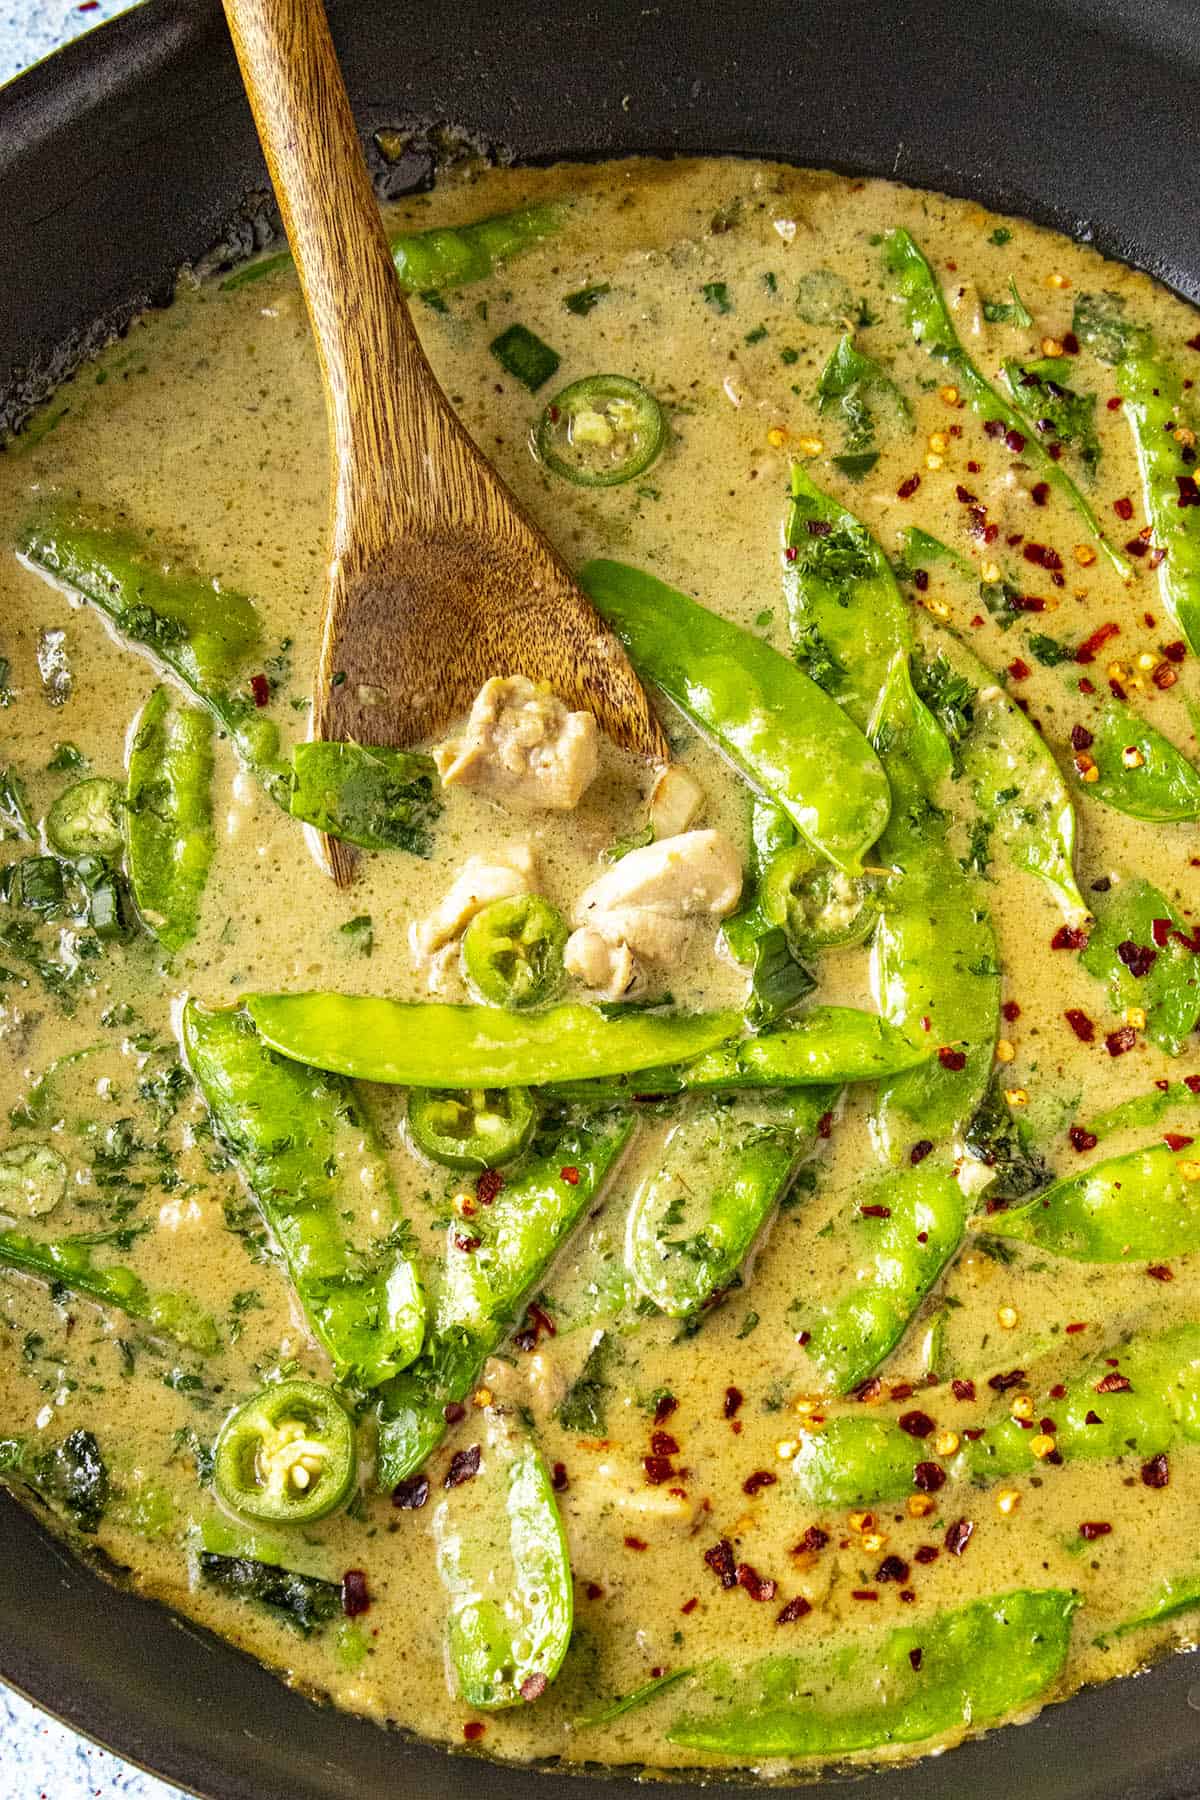 Scooping spicy green curry from the pan